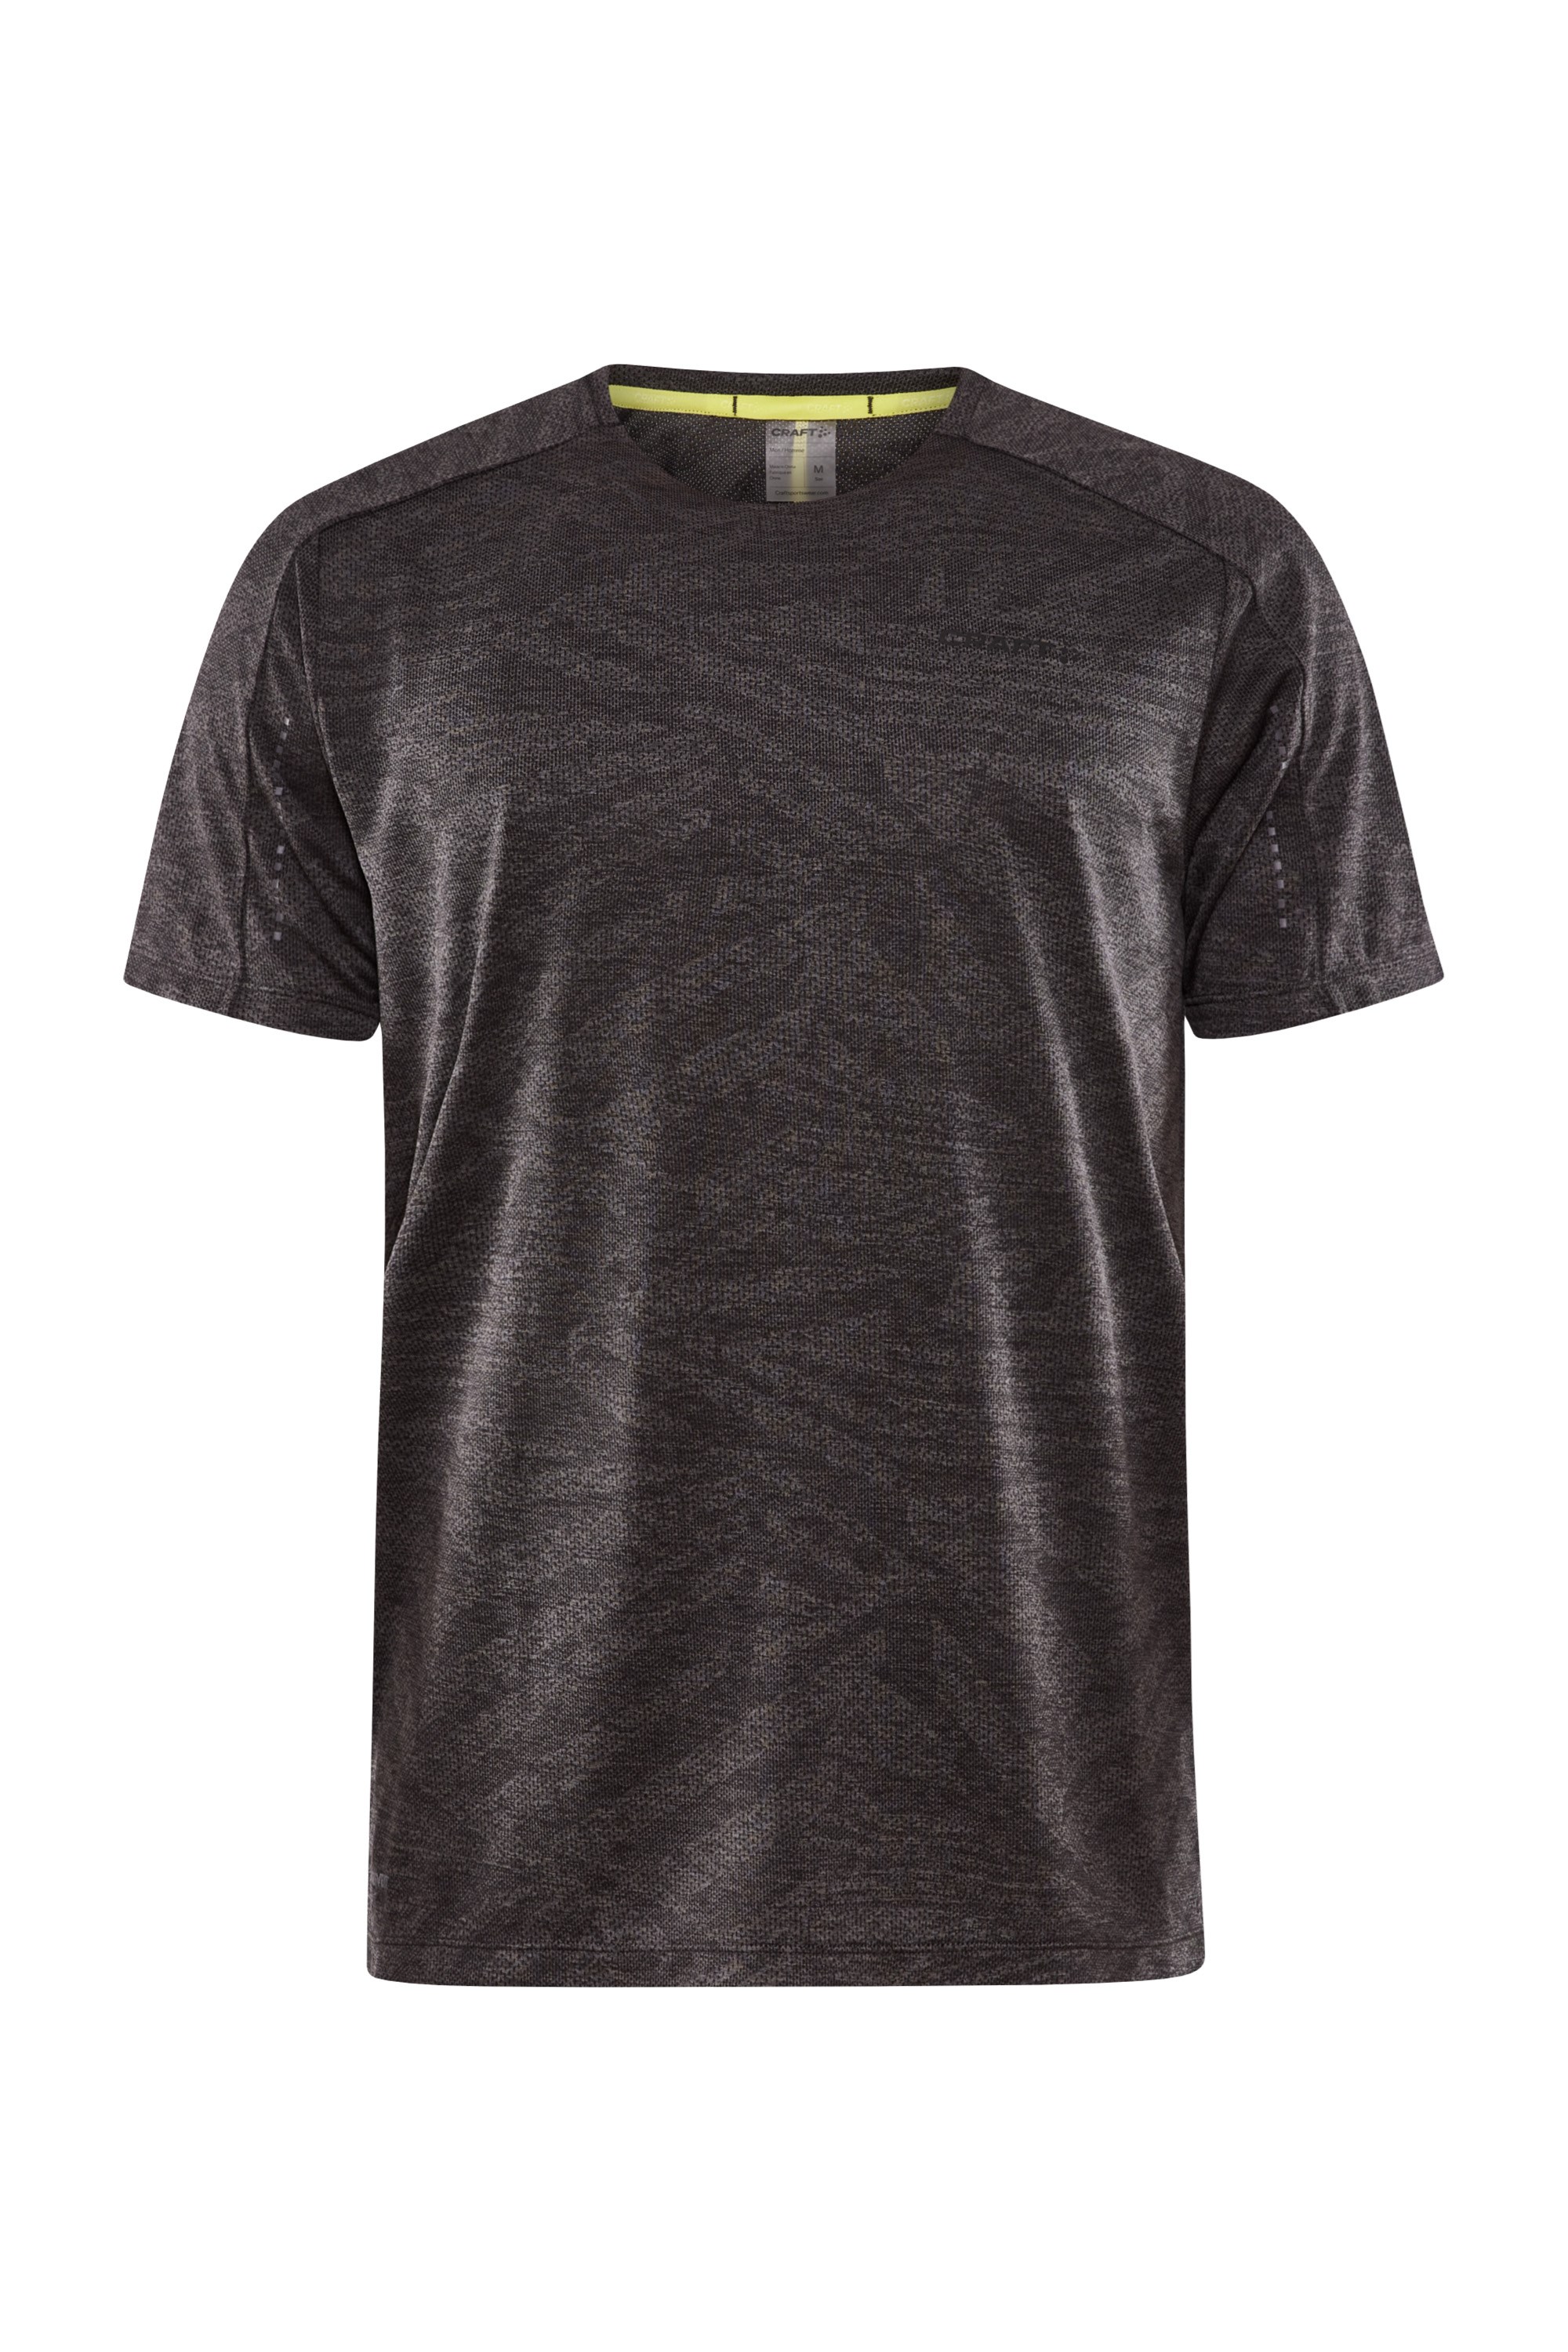 ADV HiT Mens Structure Tee -